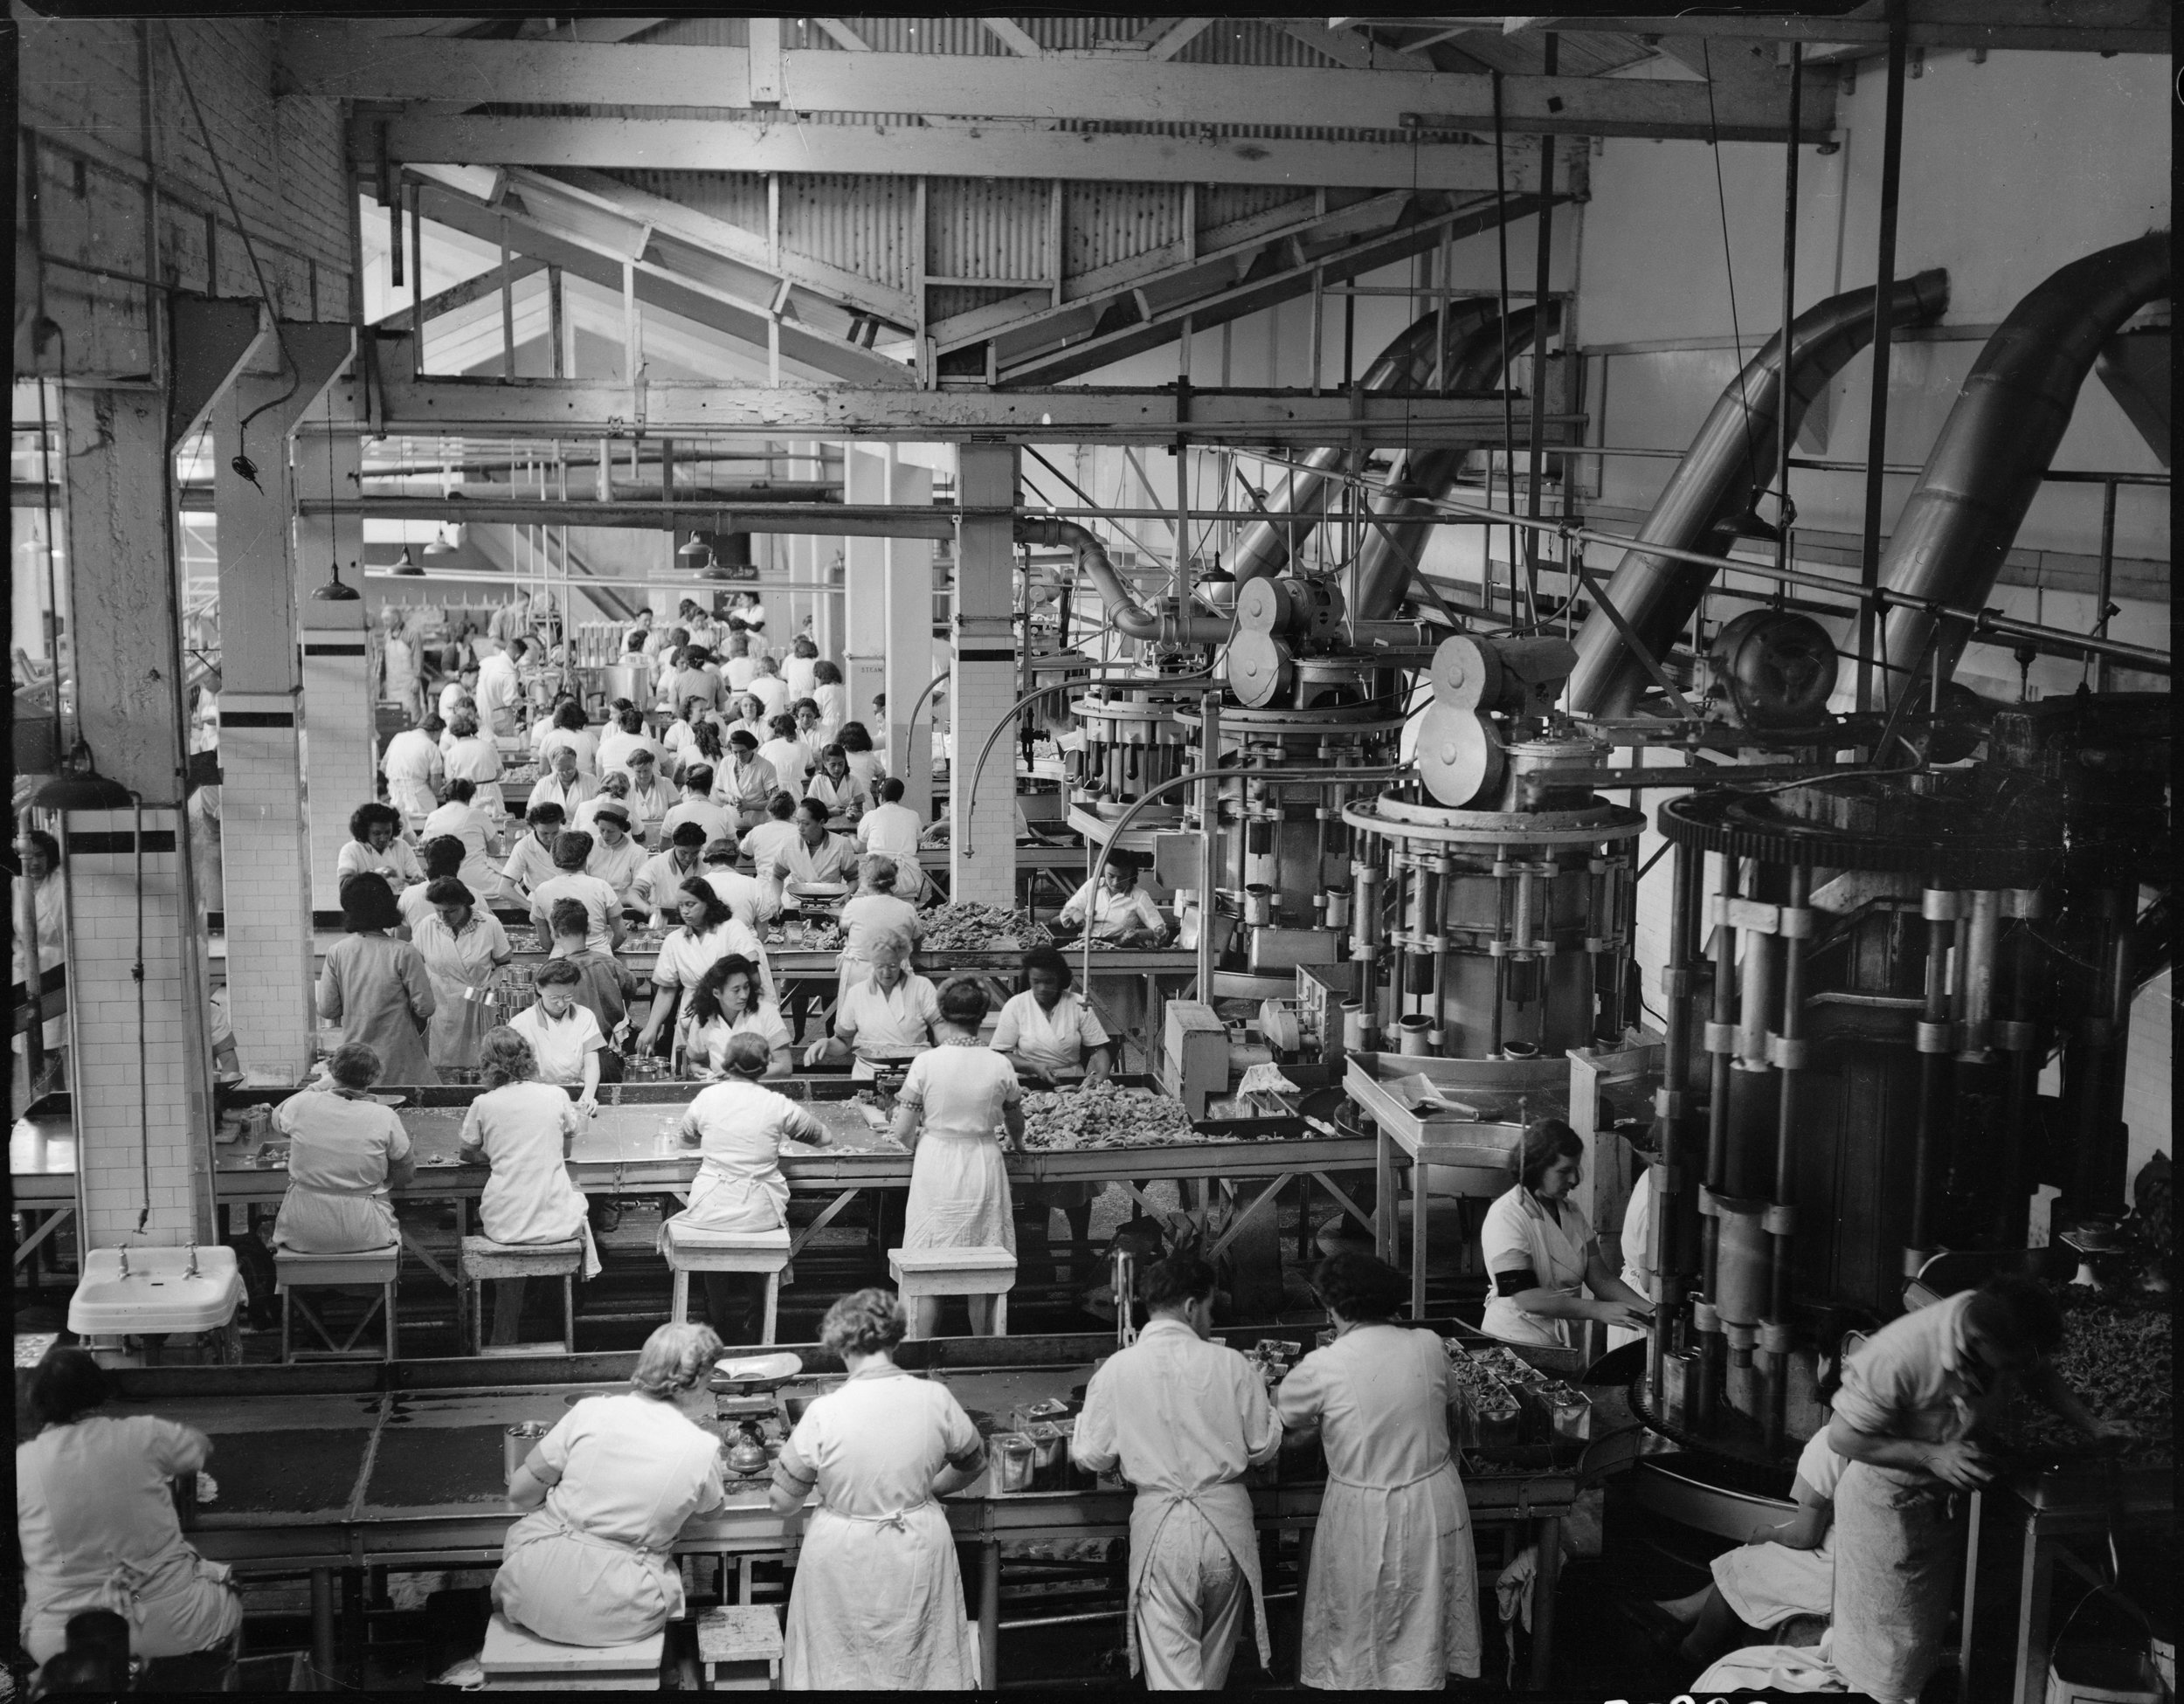  Walker, W (Mr), 1940s-1950s. Interior of cannery at Westfield Freezing Works, Otahuhu, Auckland. Tourist and Publicity. Ref: 1/2-034201-F. Alexander Turnbull Library, Wellington, New Zealand. 